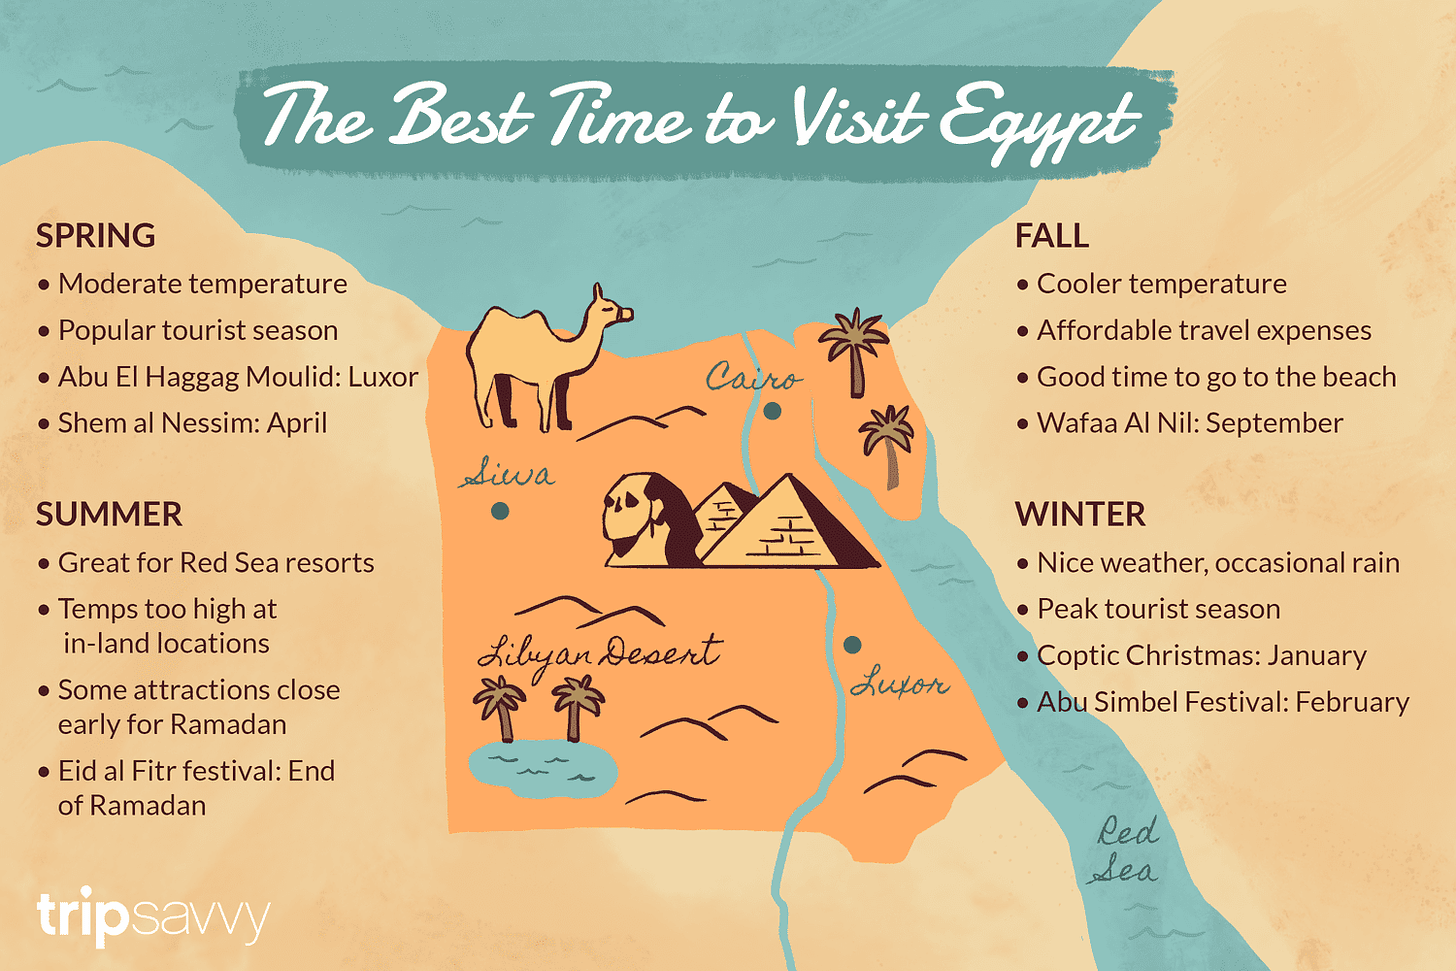 The Best Time to Visit Egypt